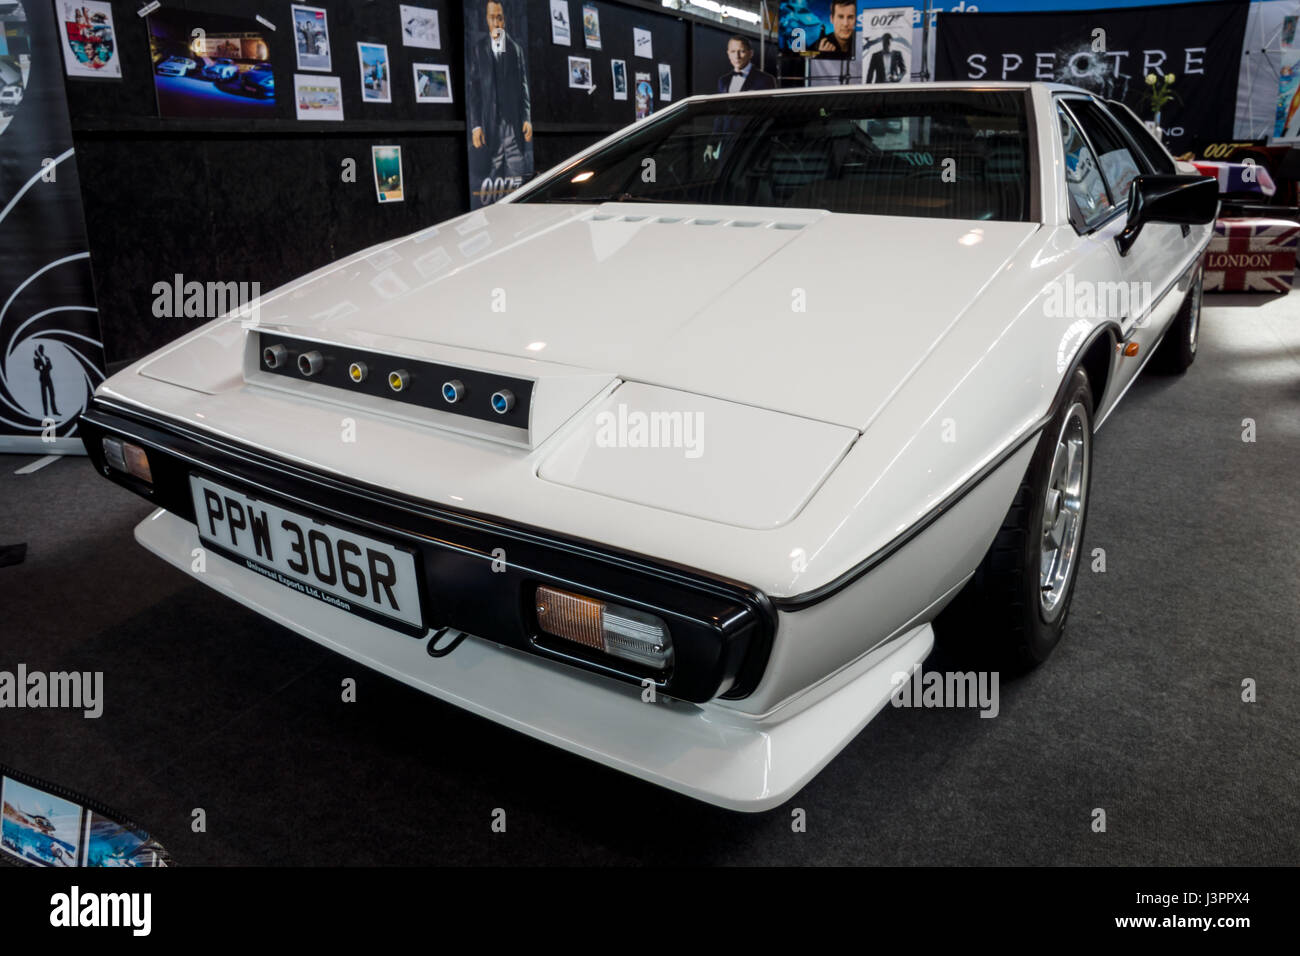 STUTTGART, GERMANY - MARCH 03, 2017: Sports car Lotus Esprit S1, 1977. From the film about James Bond 'The Spy Who Loved Me'. Europe's greatest classic car exhibition 'RETRO CLASSICS' Stock Photo